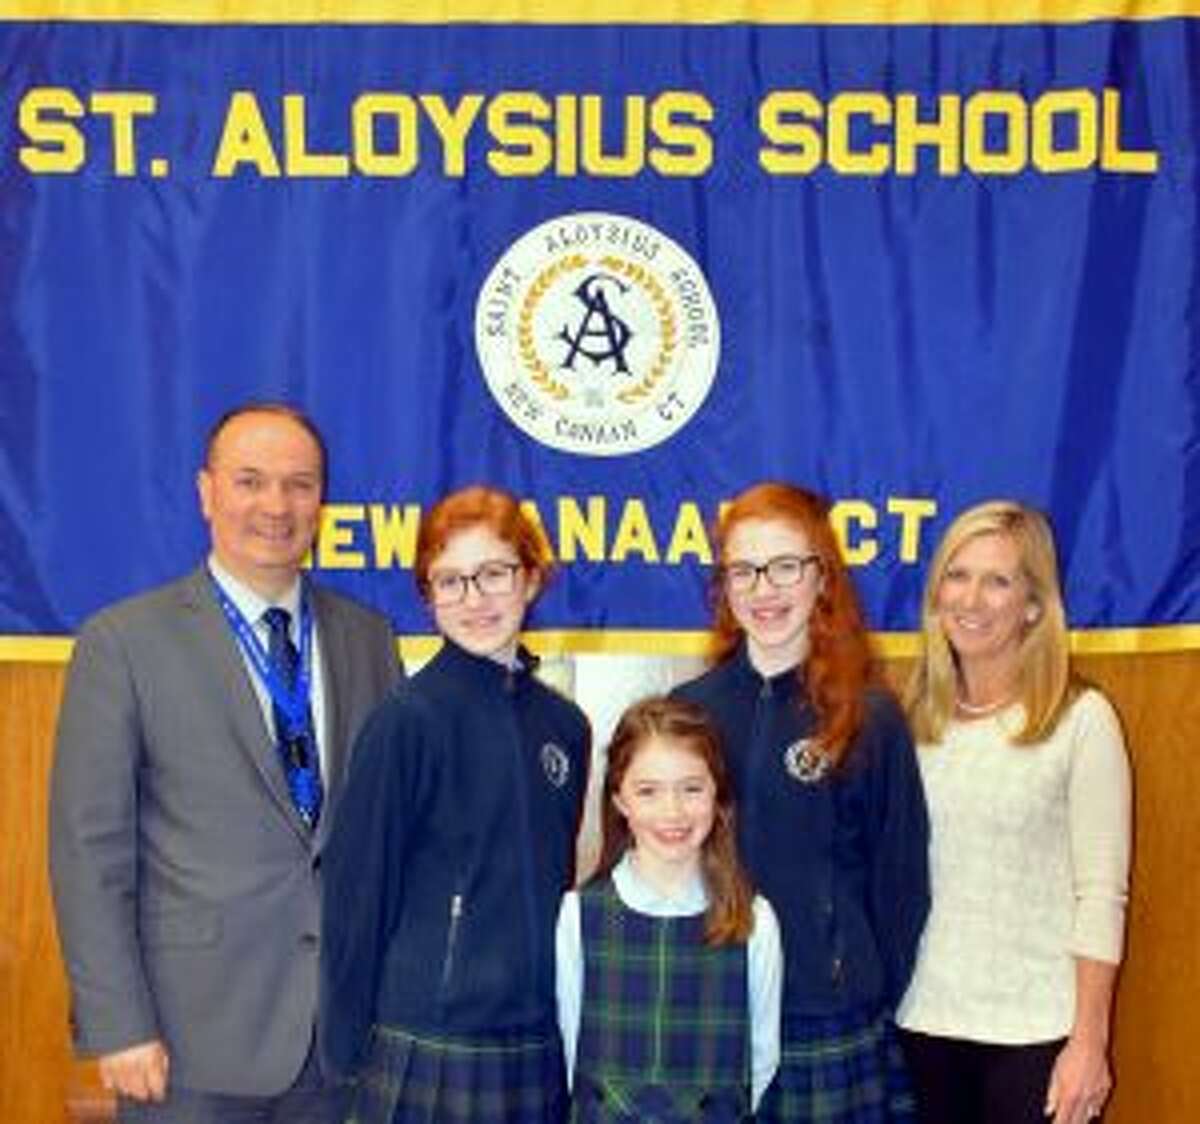 New Canaan: St. Aloysius's 'Read to Feed' in Lent shined light on the Heifer Project. Principal Bardhyl Gjoka and Read To Feed Coordinator Deborah Moran, reward winners in the student contest Anna Gayer, left; Noelle Gayer, right; and Lilly Gayer, front. — Contributed photo